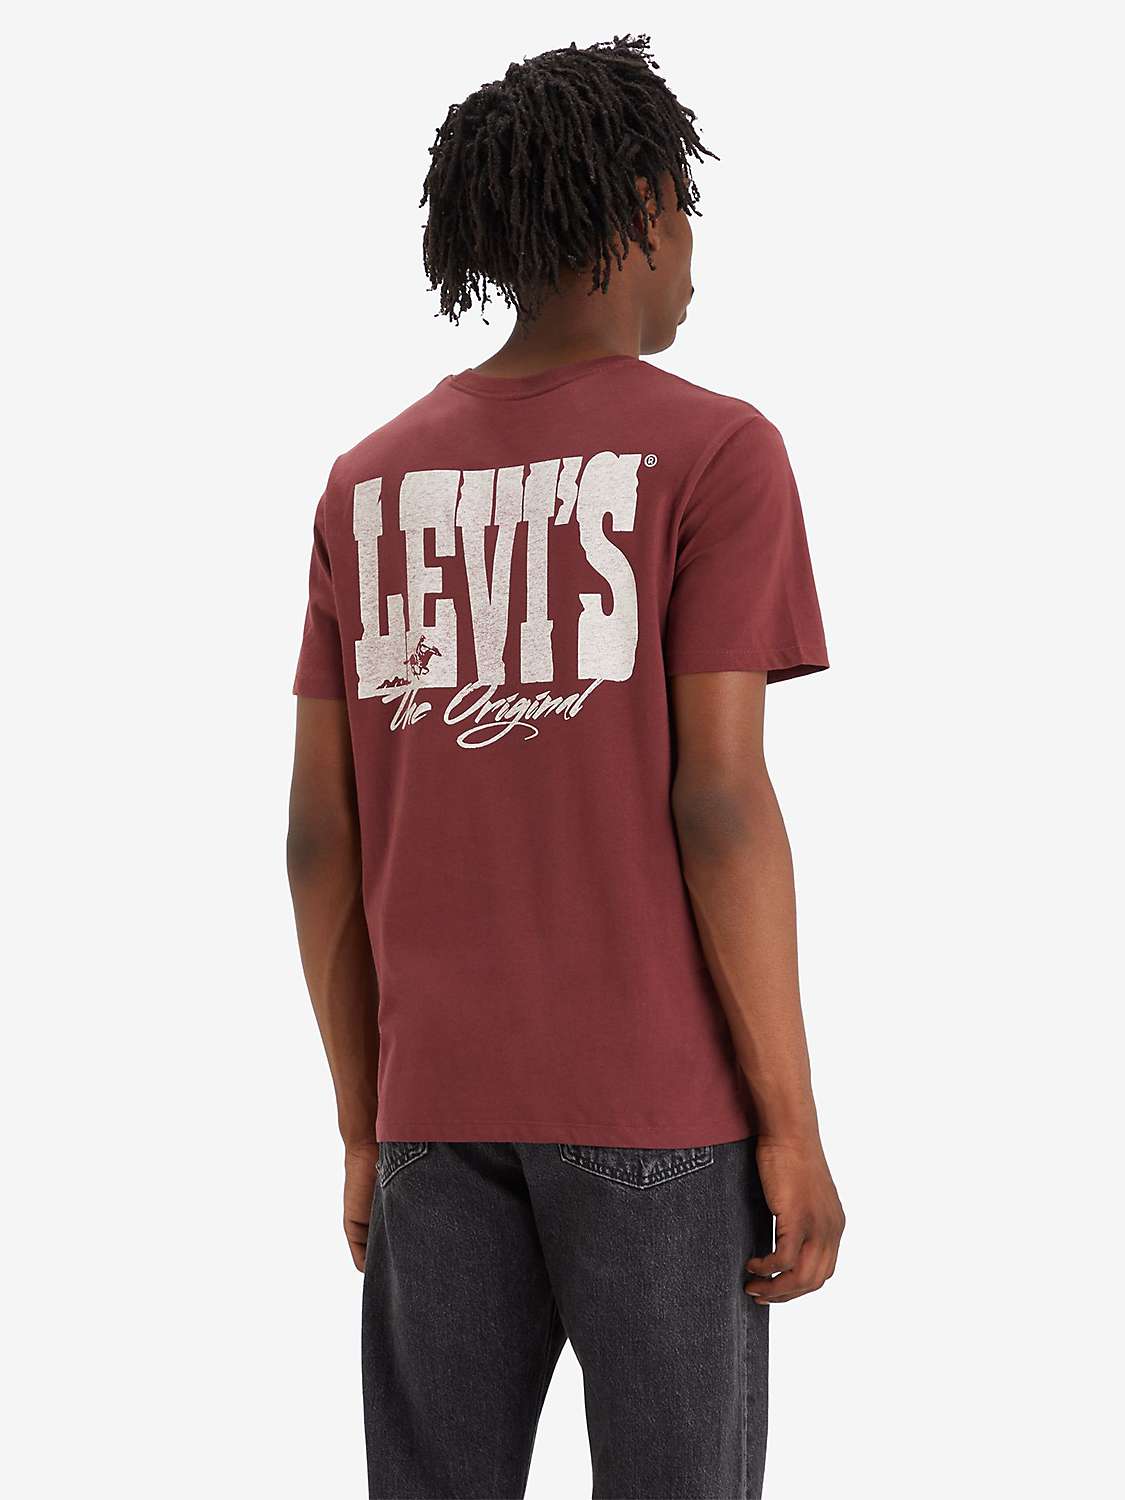 Buy Levi's Graphic Crew Neck T-Shirt, Red Online at johnlewis.com